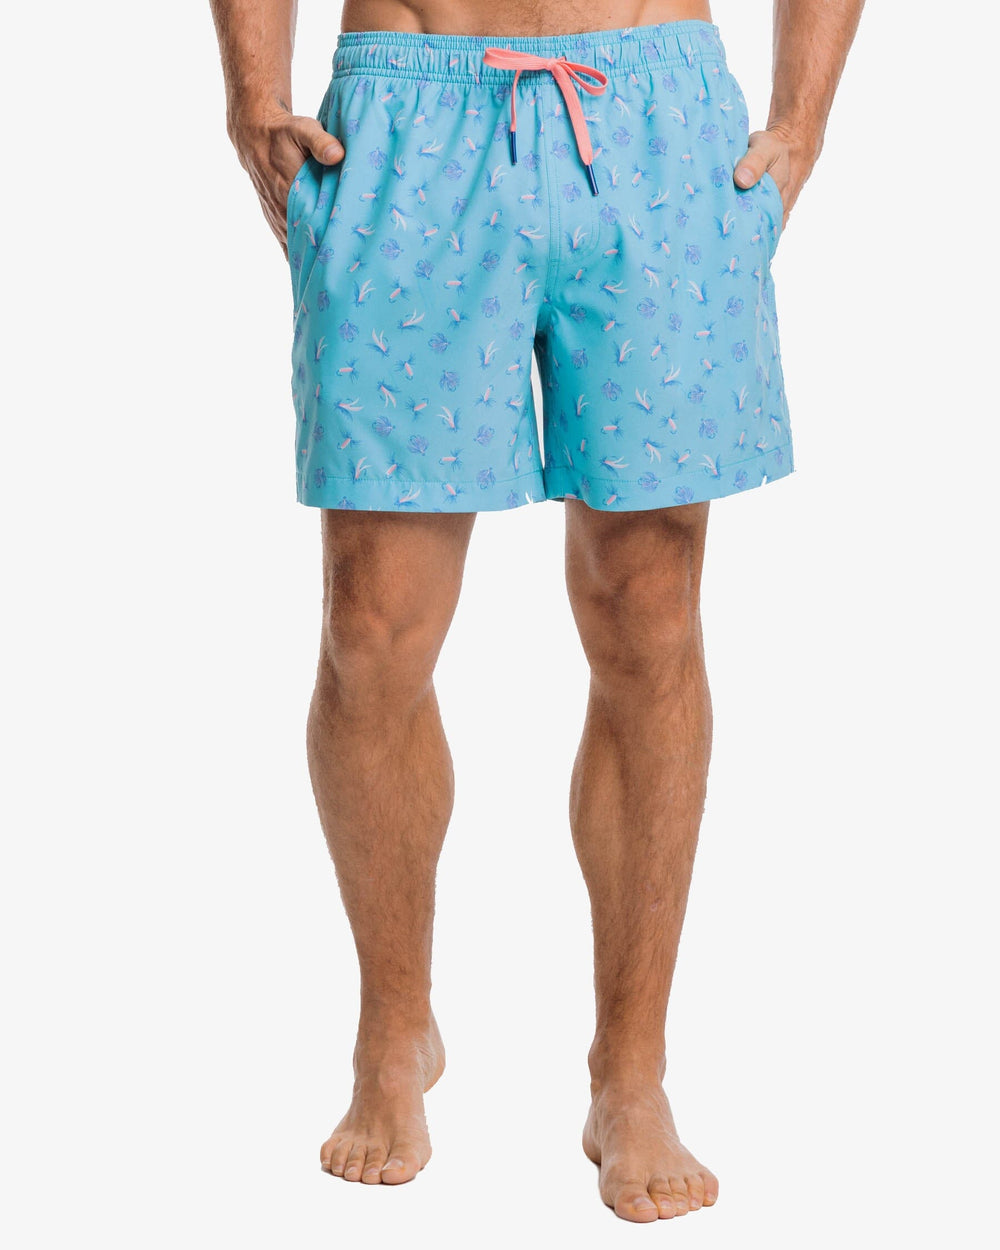 The front view of the Southern Tide Guy With Allure Printed Swim Trunk by Southern Tide - Tidal Wave